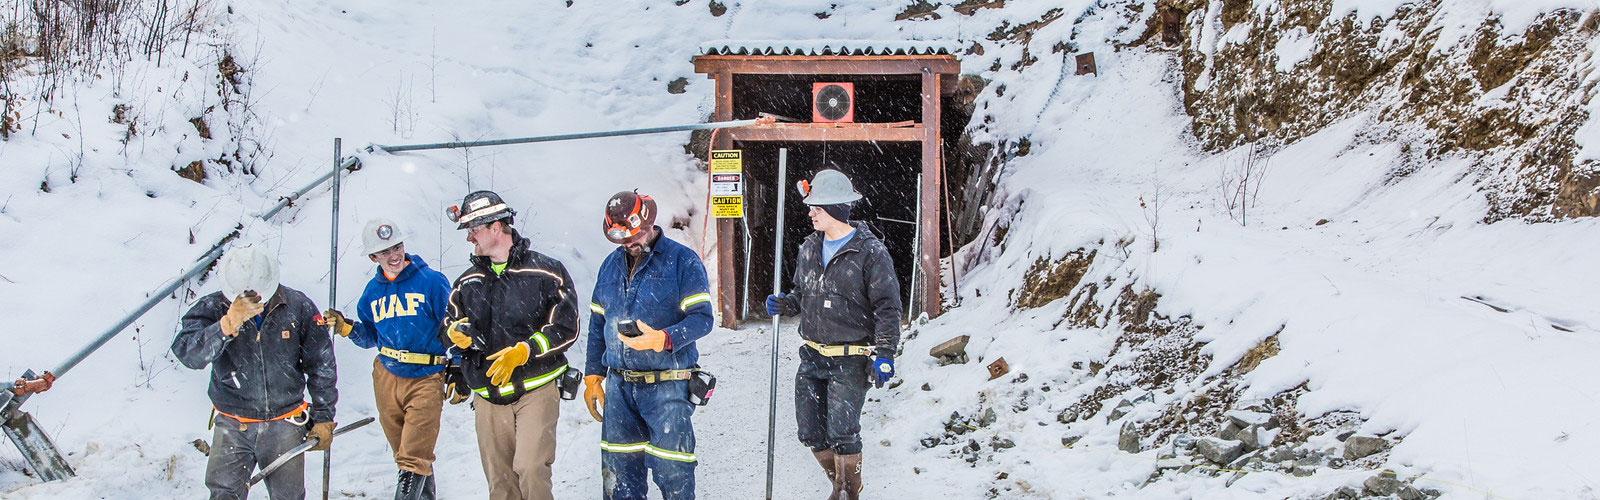 People exiting Silver Fox mine